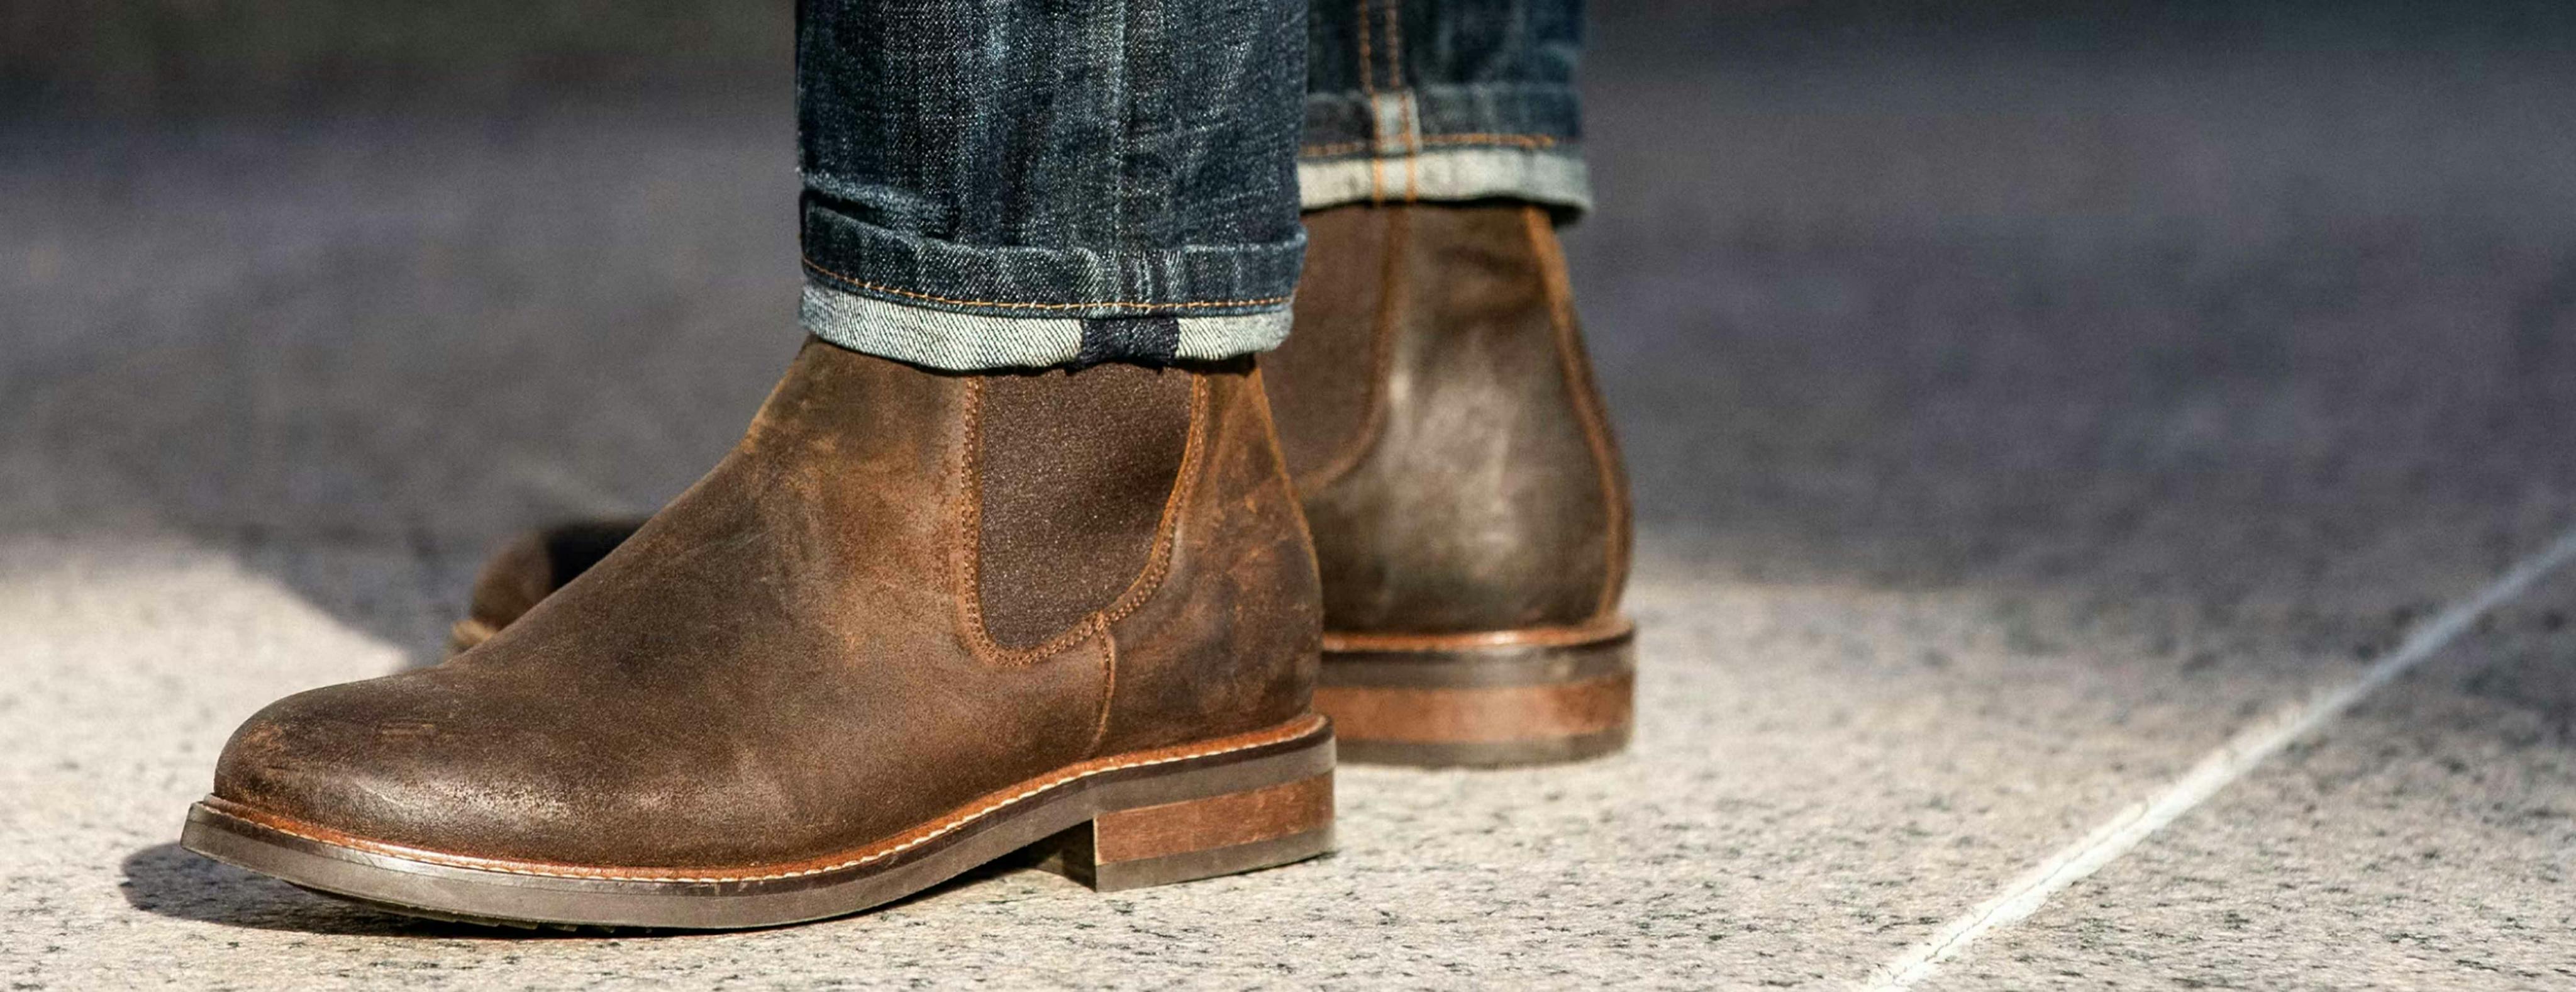 The 6 Most Stylish Ways To Wear Chelsea Boots  Pants outfit men, Cool  outfits for men, Chelsea boots outfit